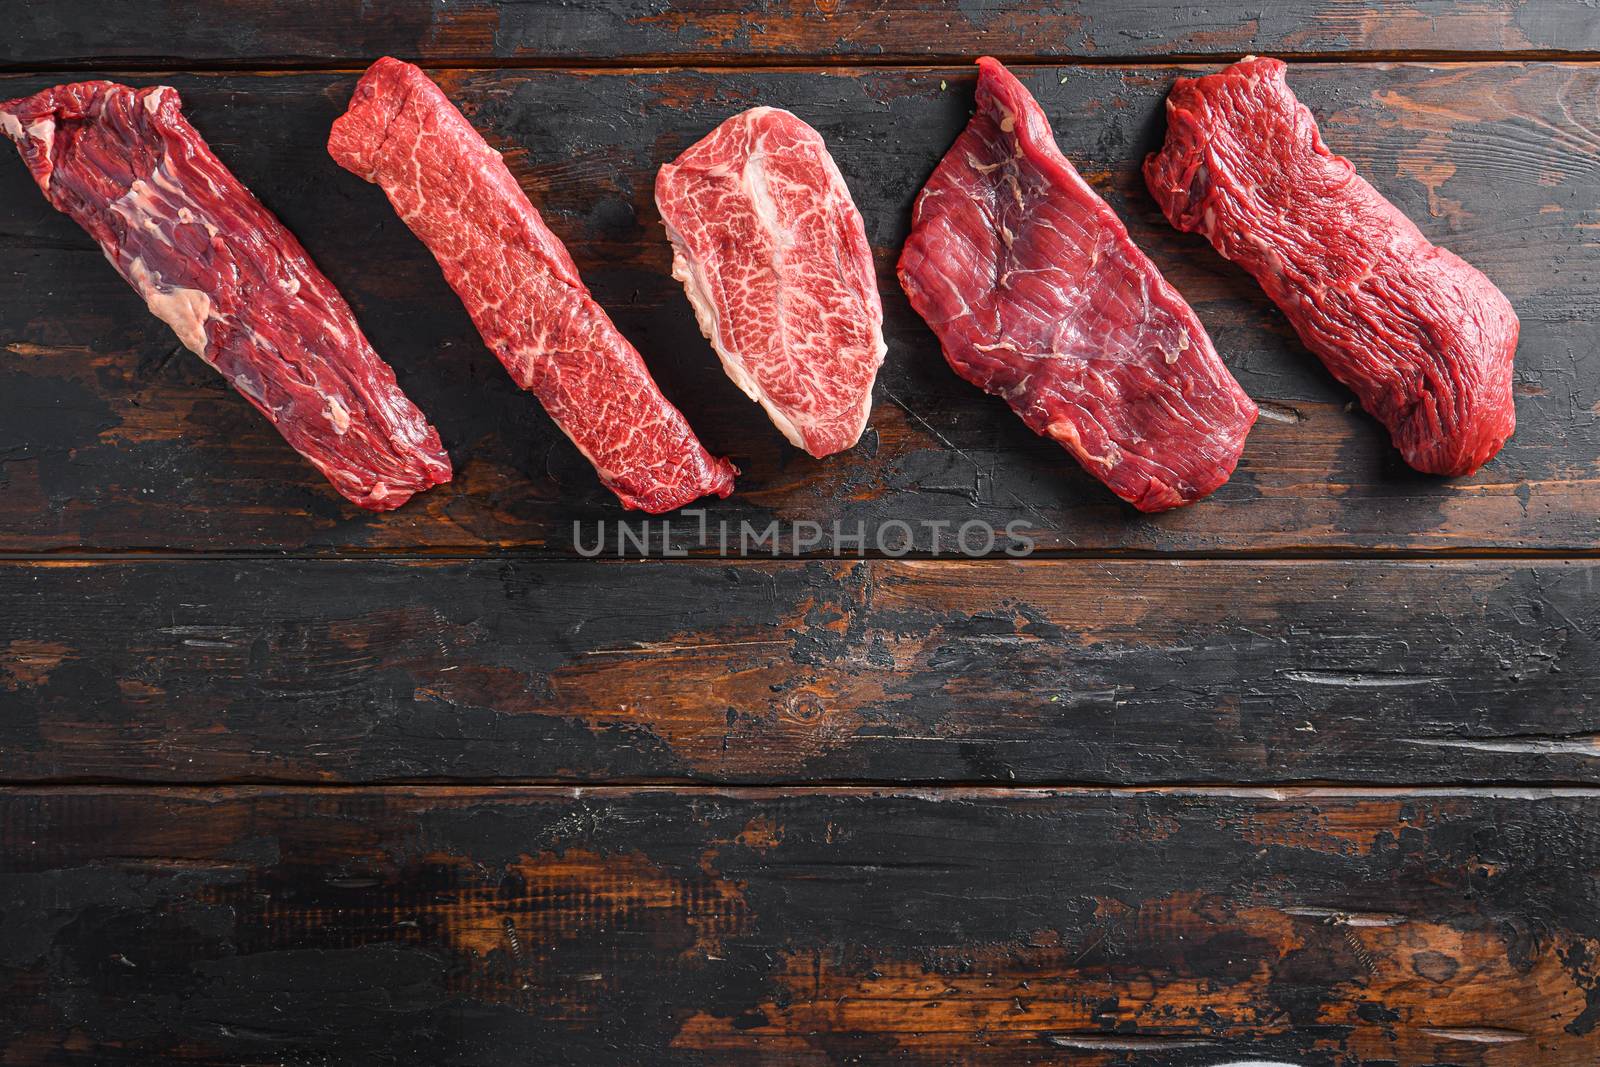 A set of different types of raw beef steaks alternative cut flap flank Steak, machete steak or skirt cut, Top blade or flat iron beef and tri tip, triangle roast with denver cut top view space for text.